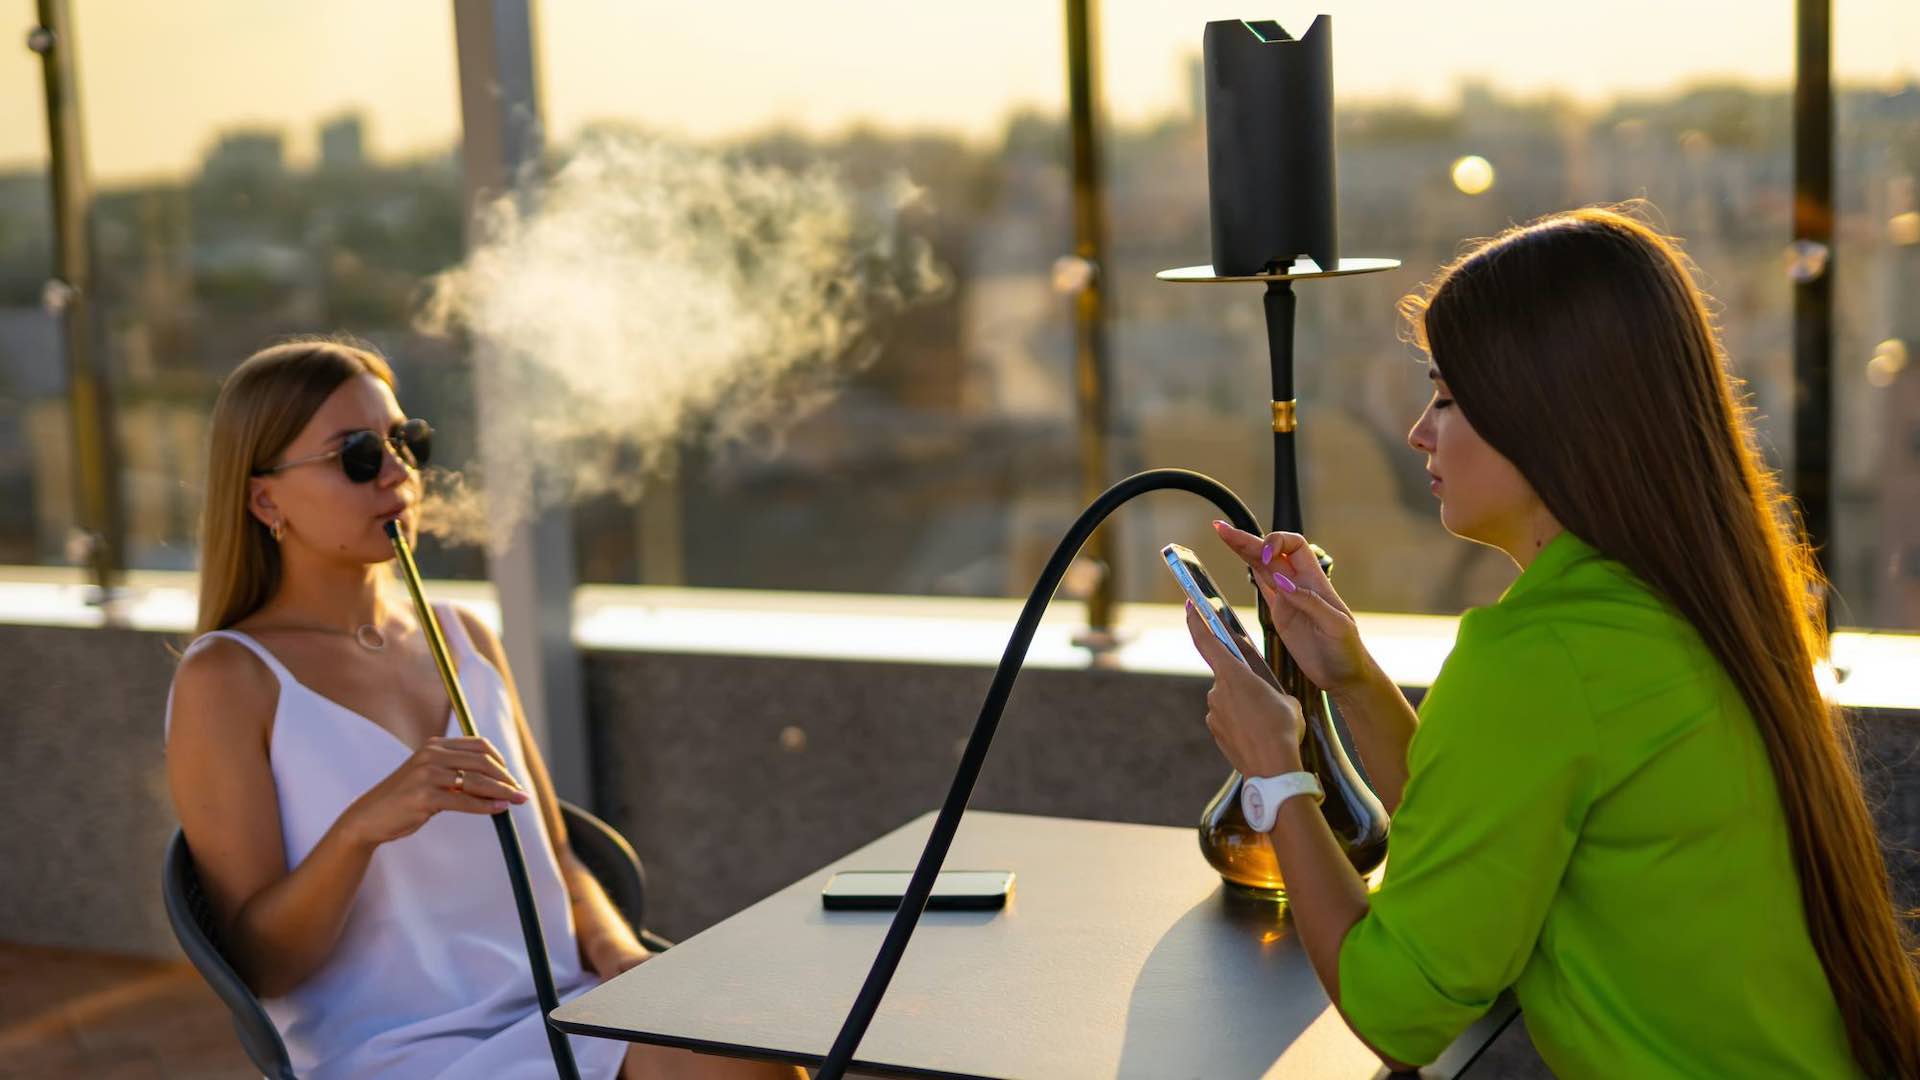 Sheesha cafes are an epidemic of illness and inaction